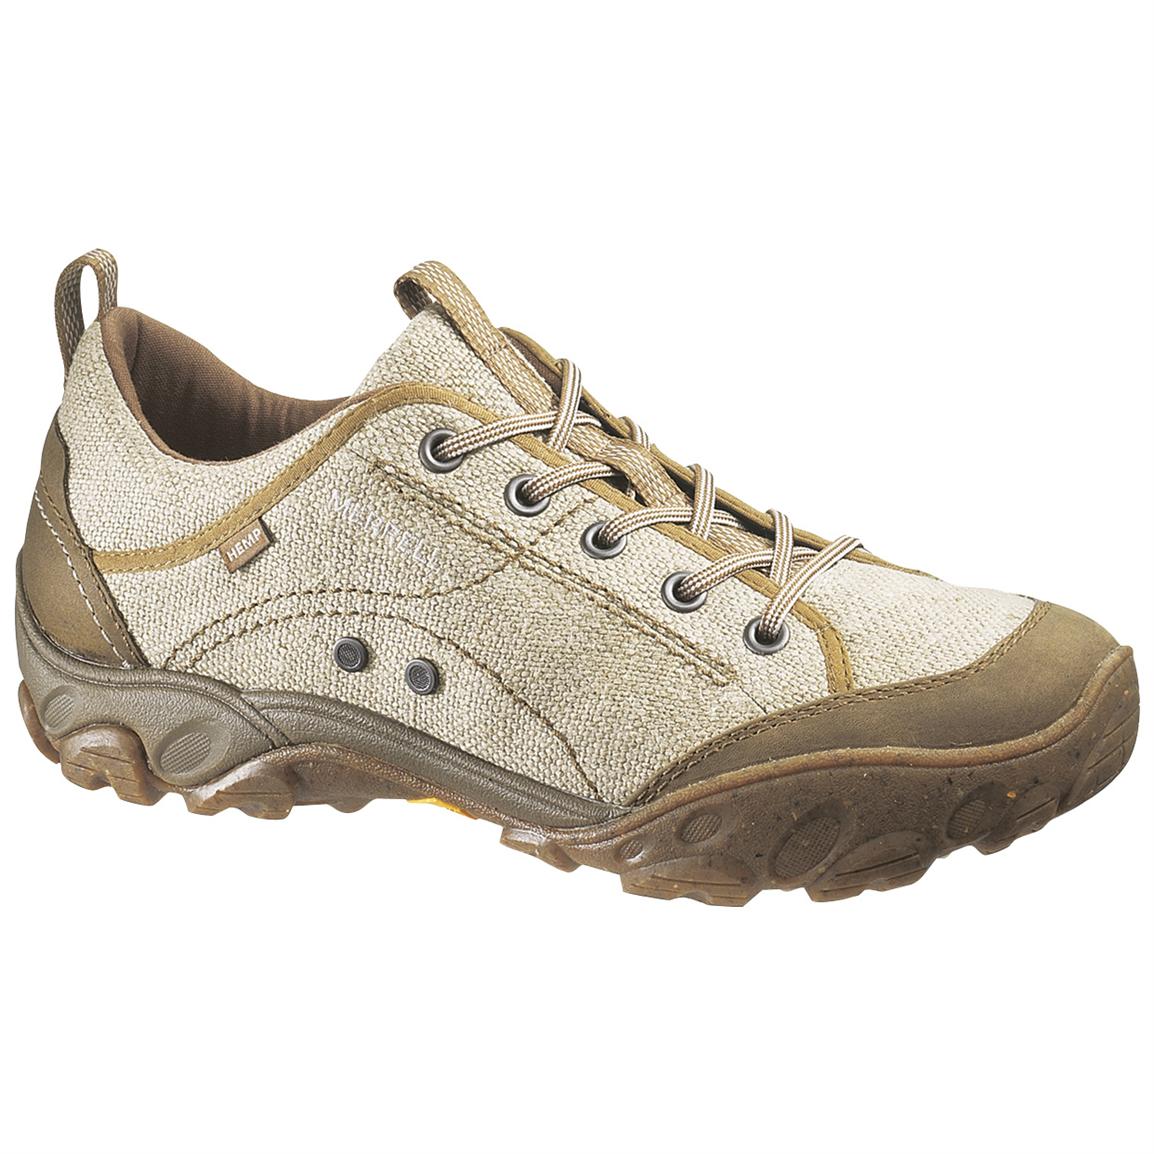 Men's Merrell® Sight Hemp Shoes - 177751, Casual Shoes at Sportsman's Guide